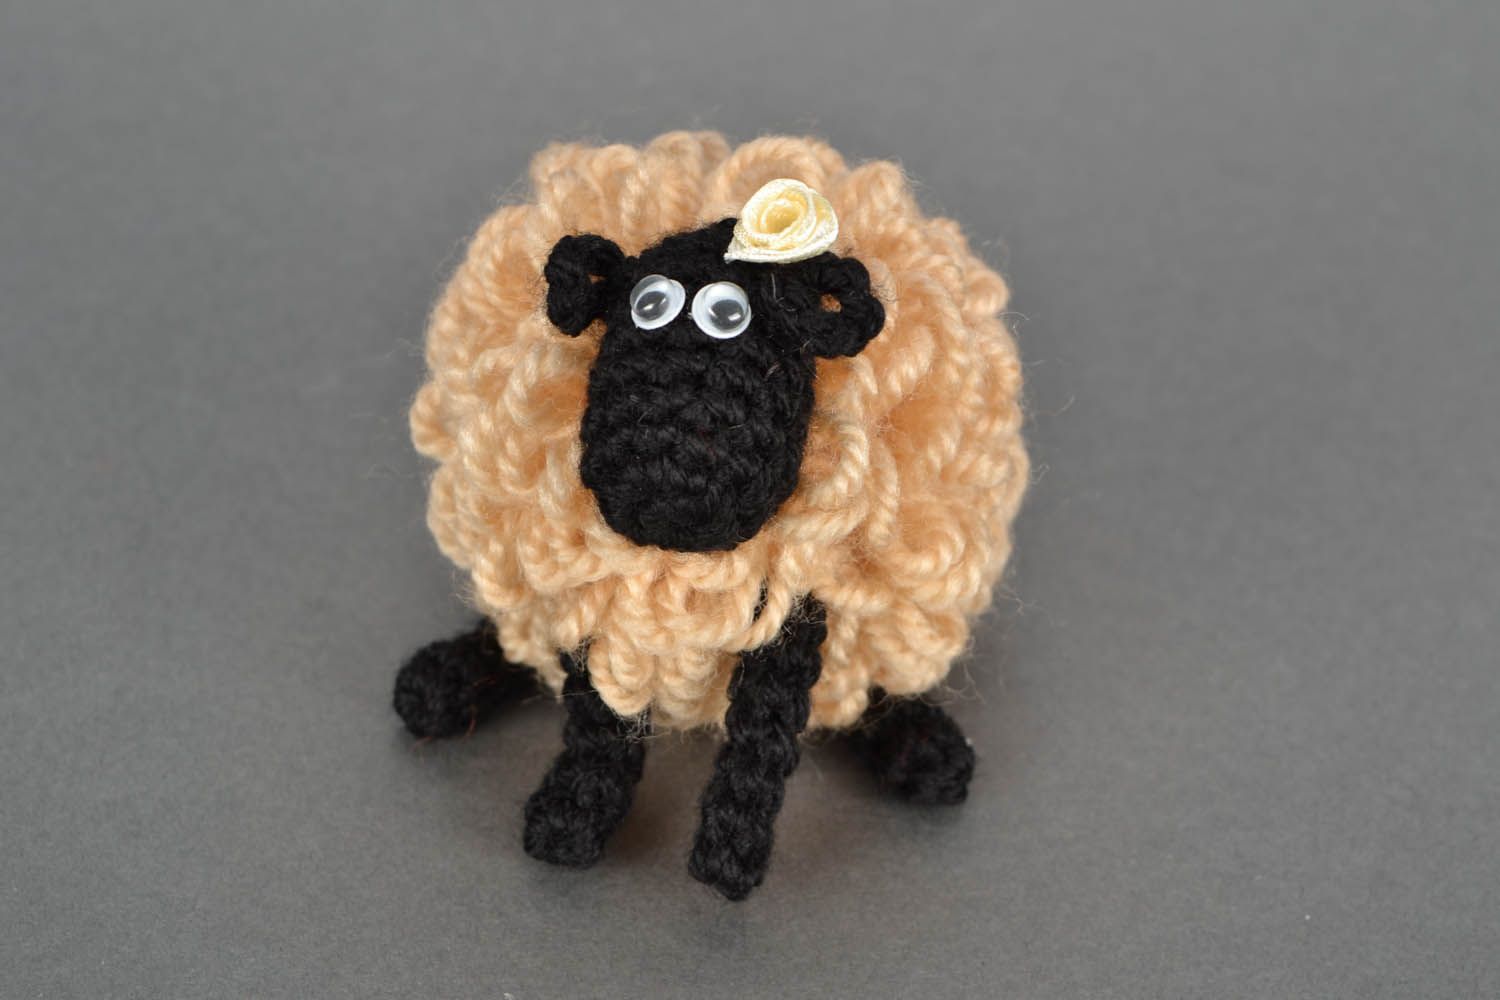 Crocheted toy Sheep photo 4